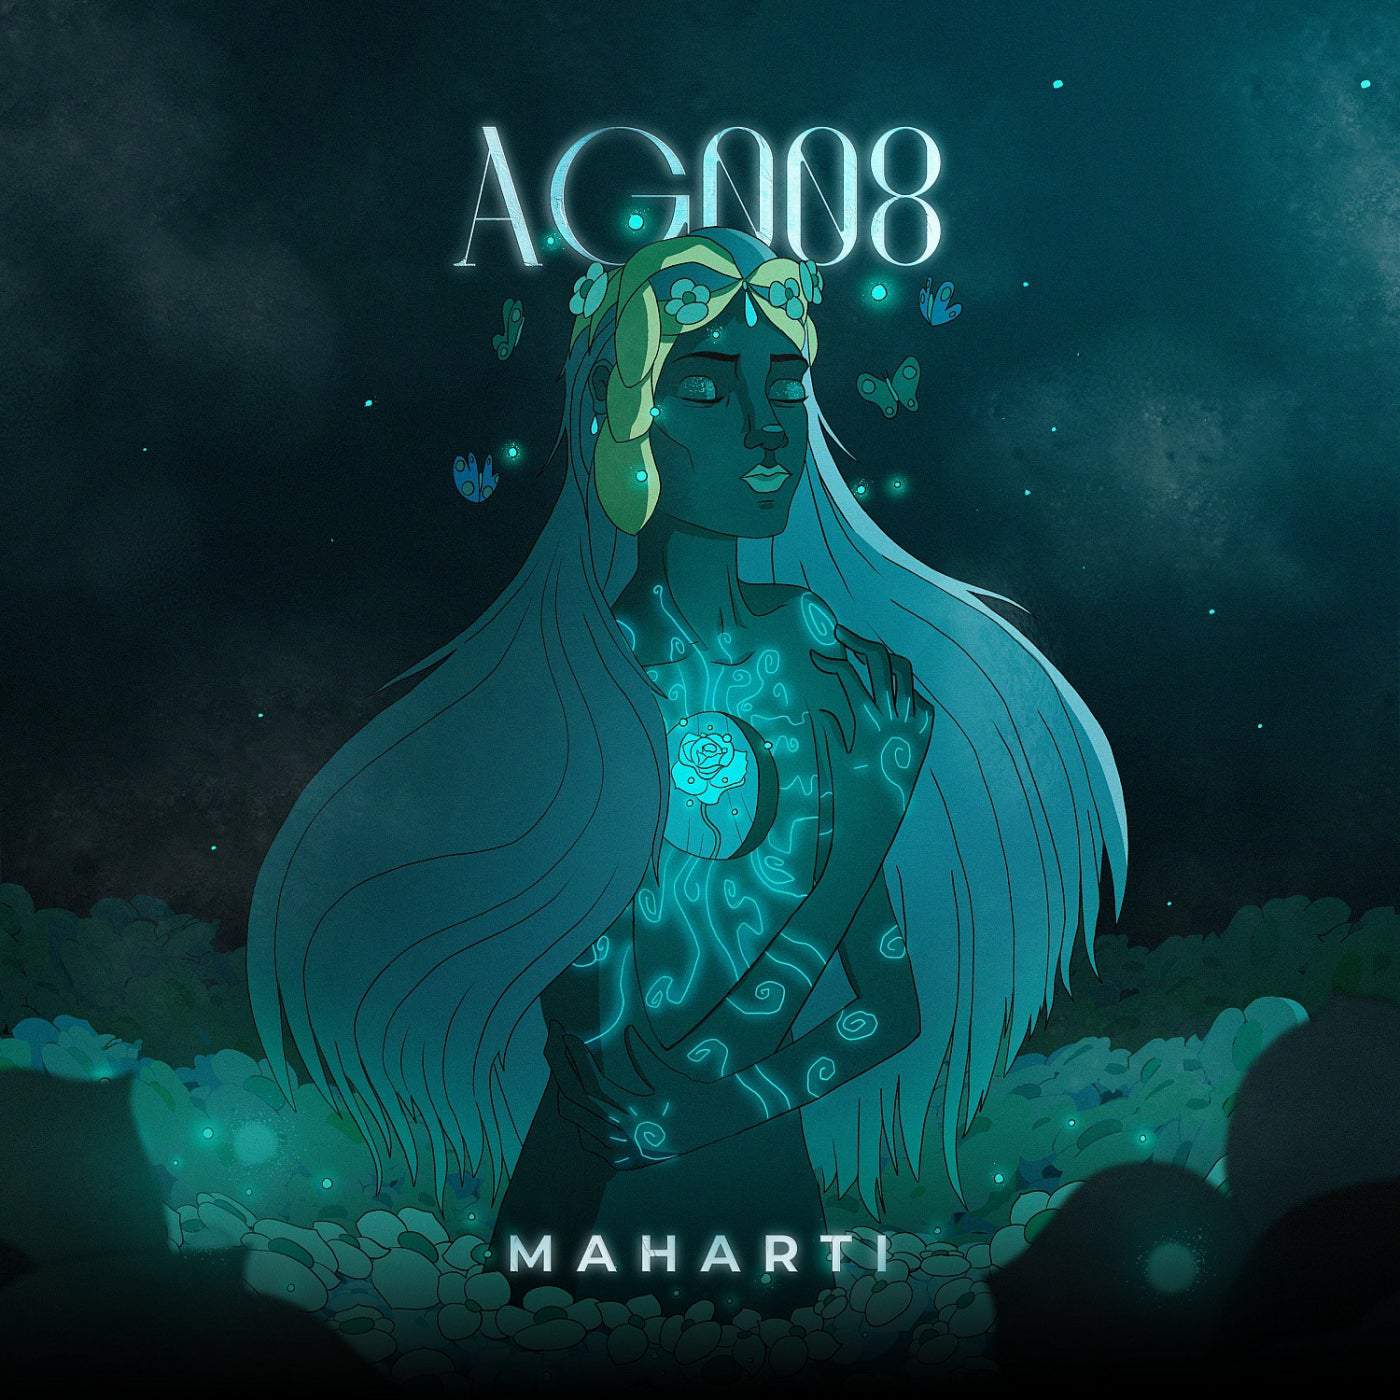 Download Maharti - AG008 on Electrobuzz